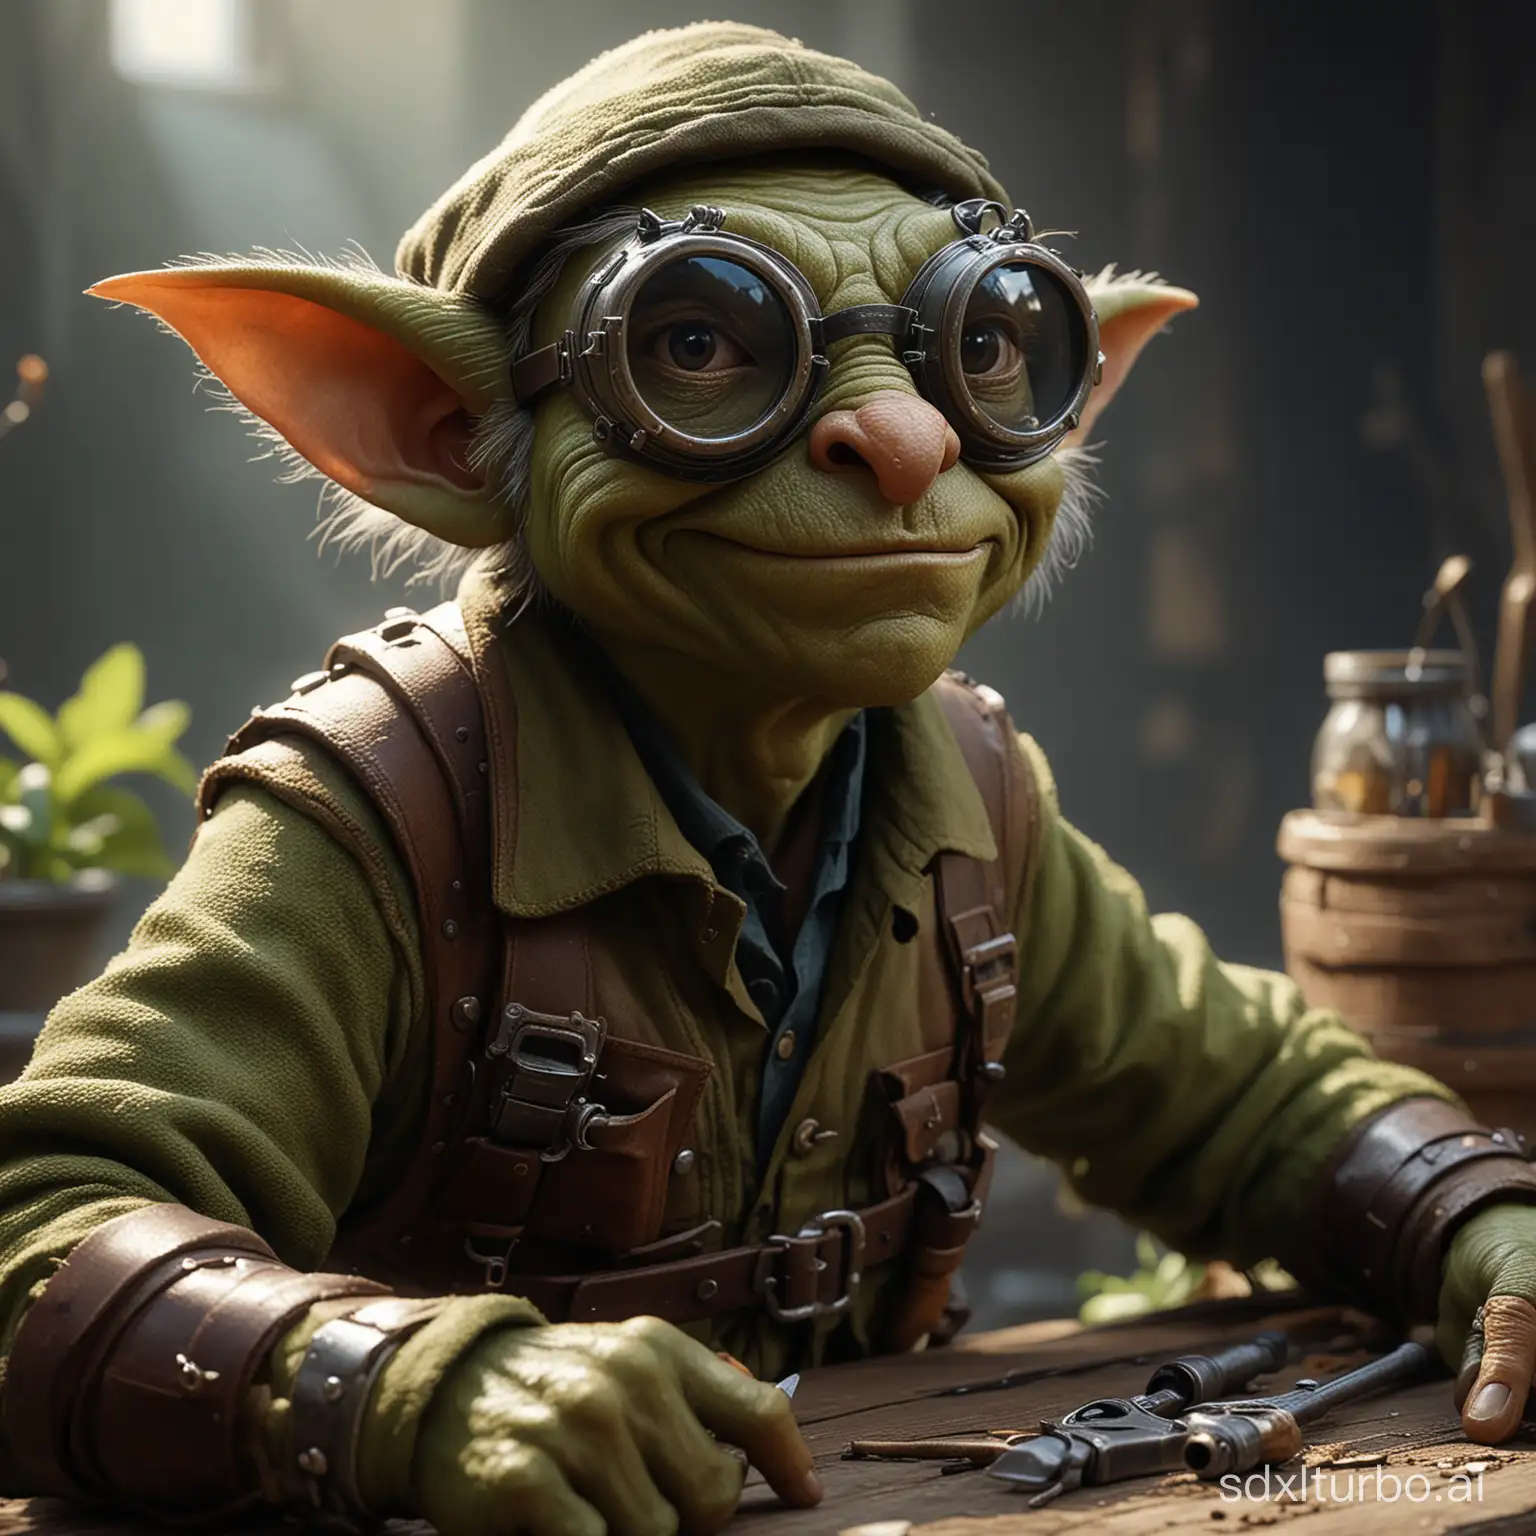 Masterpiece, best quality, 8k, professional, created by a famous artist, popular on artstation, intricate details, realism, bokeh, photo-realism, shadows, natural light, dramatic, source of realism, zPDXL, Gazlowe-Goblin Tinker, a clever and creative goblin engineer, wearing goggles and a tool belt.